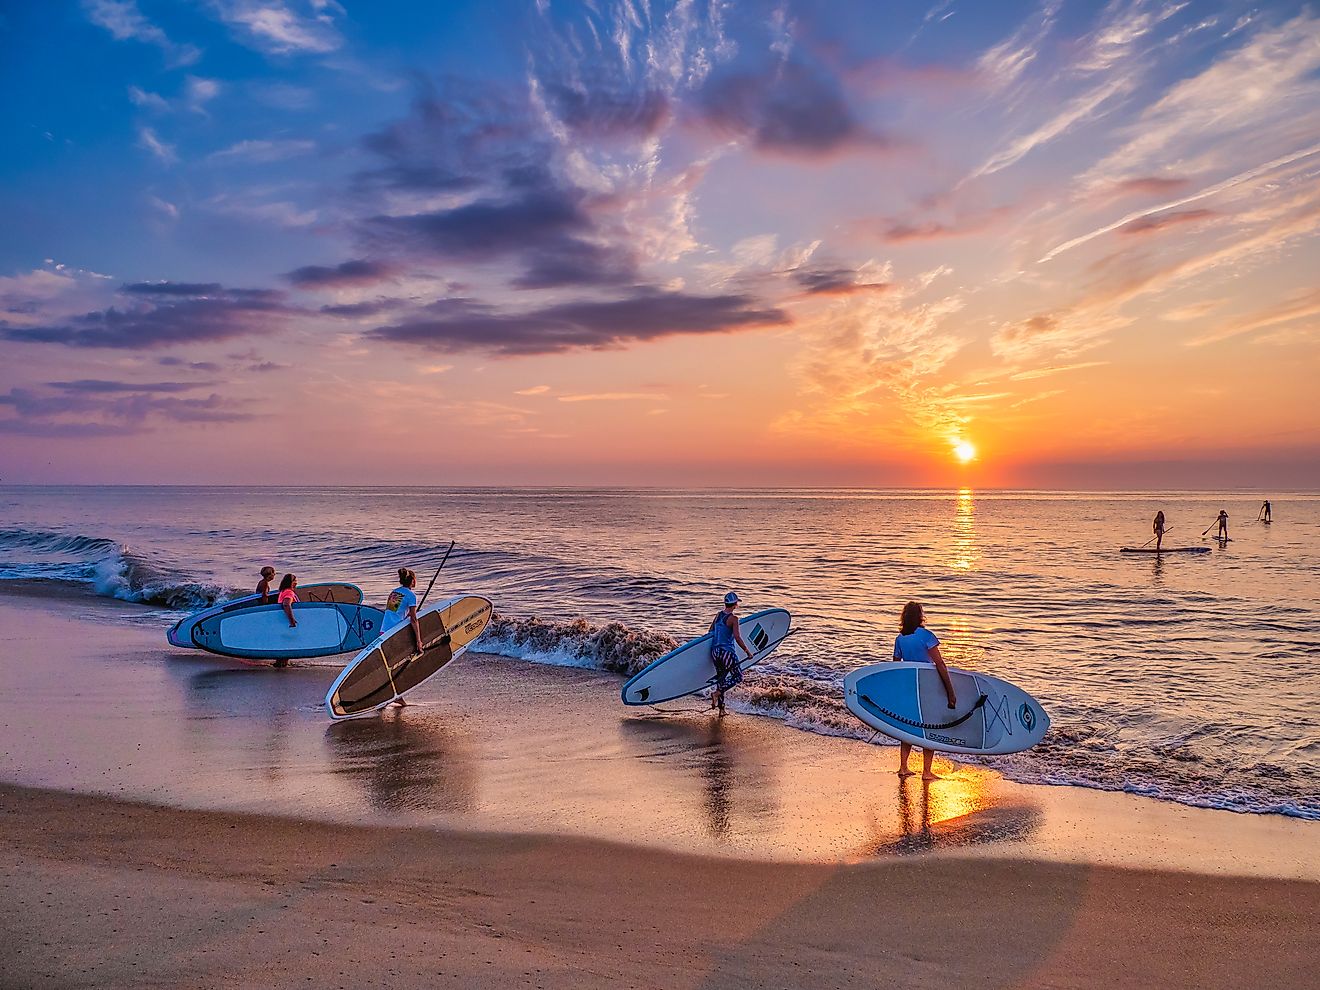 A group of young women paddleboarding at sunrise along the coast of Bethany Beach, Delaware, USA. Editorial credit: David Kay / Shutterstock.com